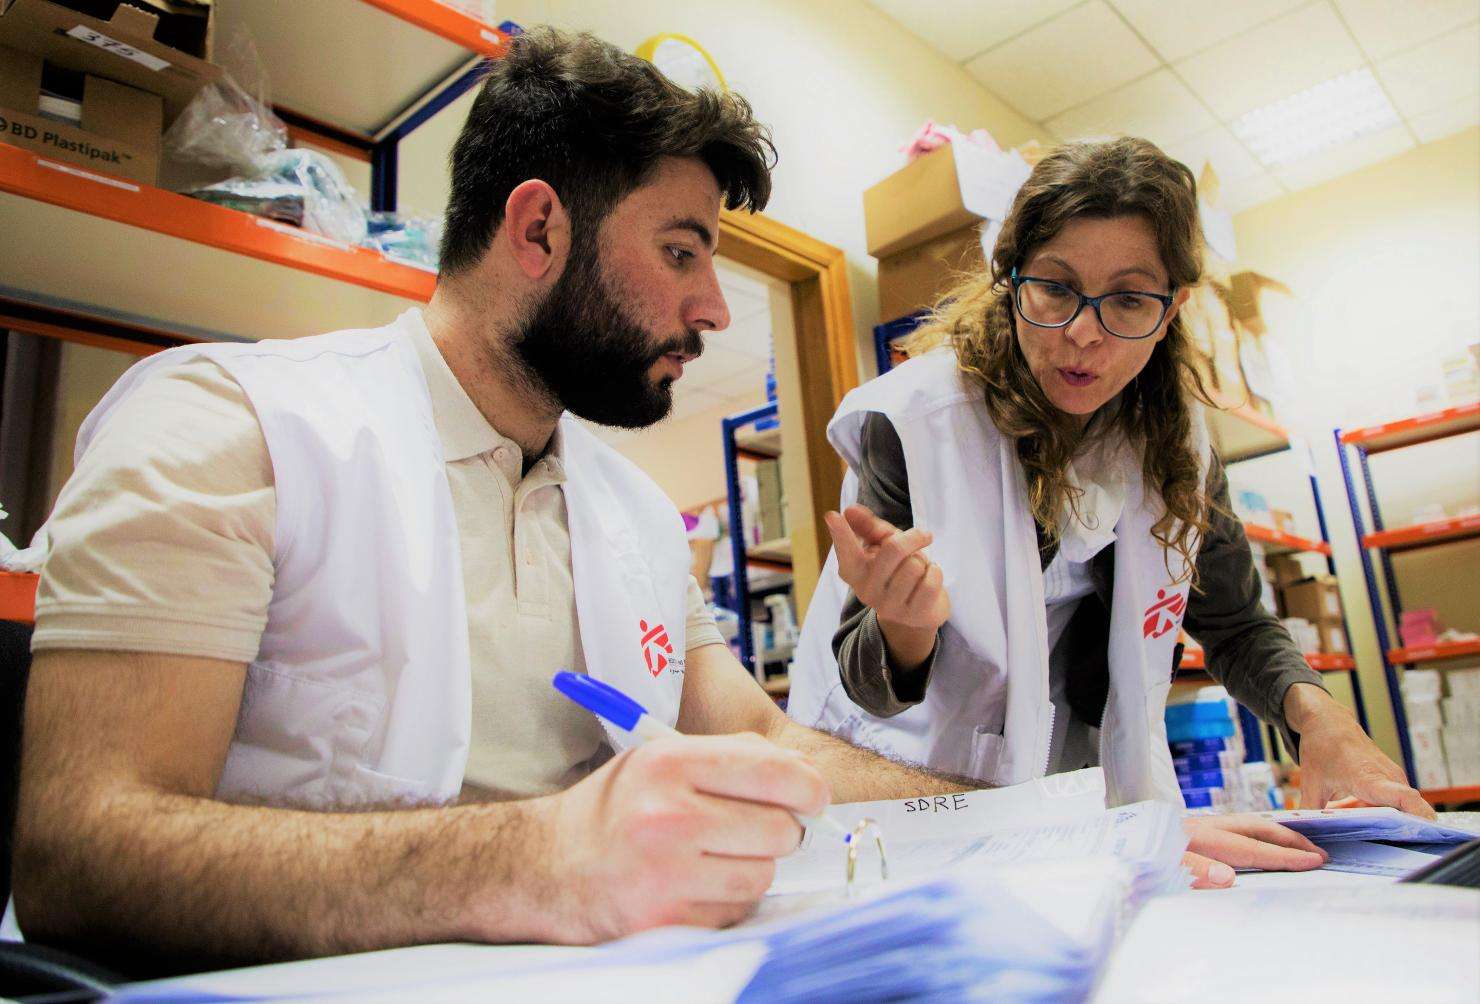 MSF field workers providing logistical support in the pharmacy of Tal Marak hospital in Zummar, north of Mosul, where MSF runs a maternity clinic, an emergency room and a pediatric inpatient department.